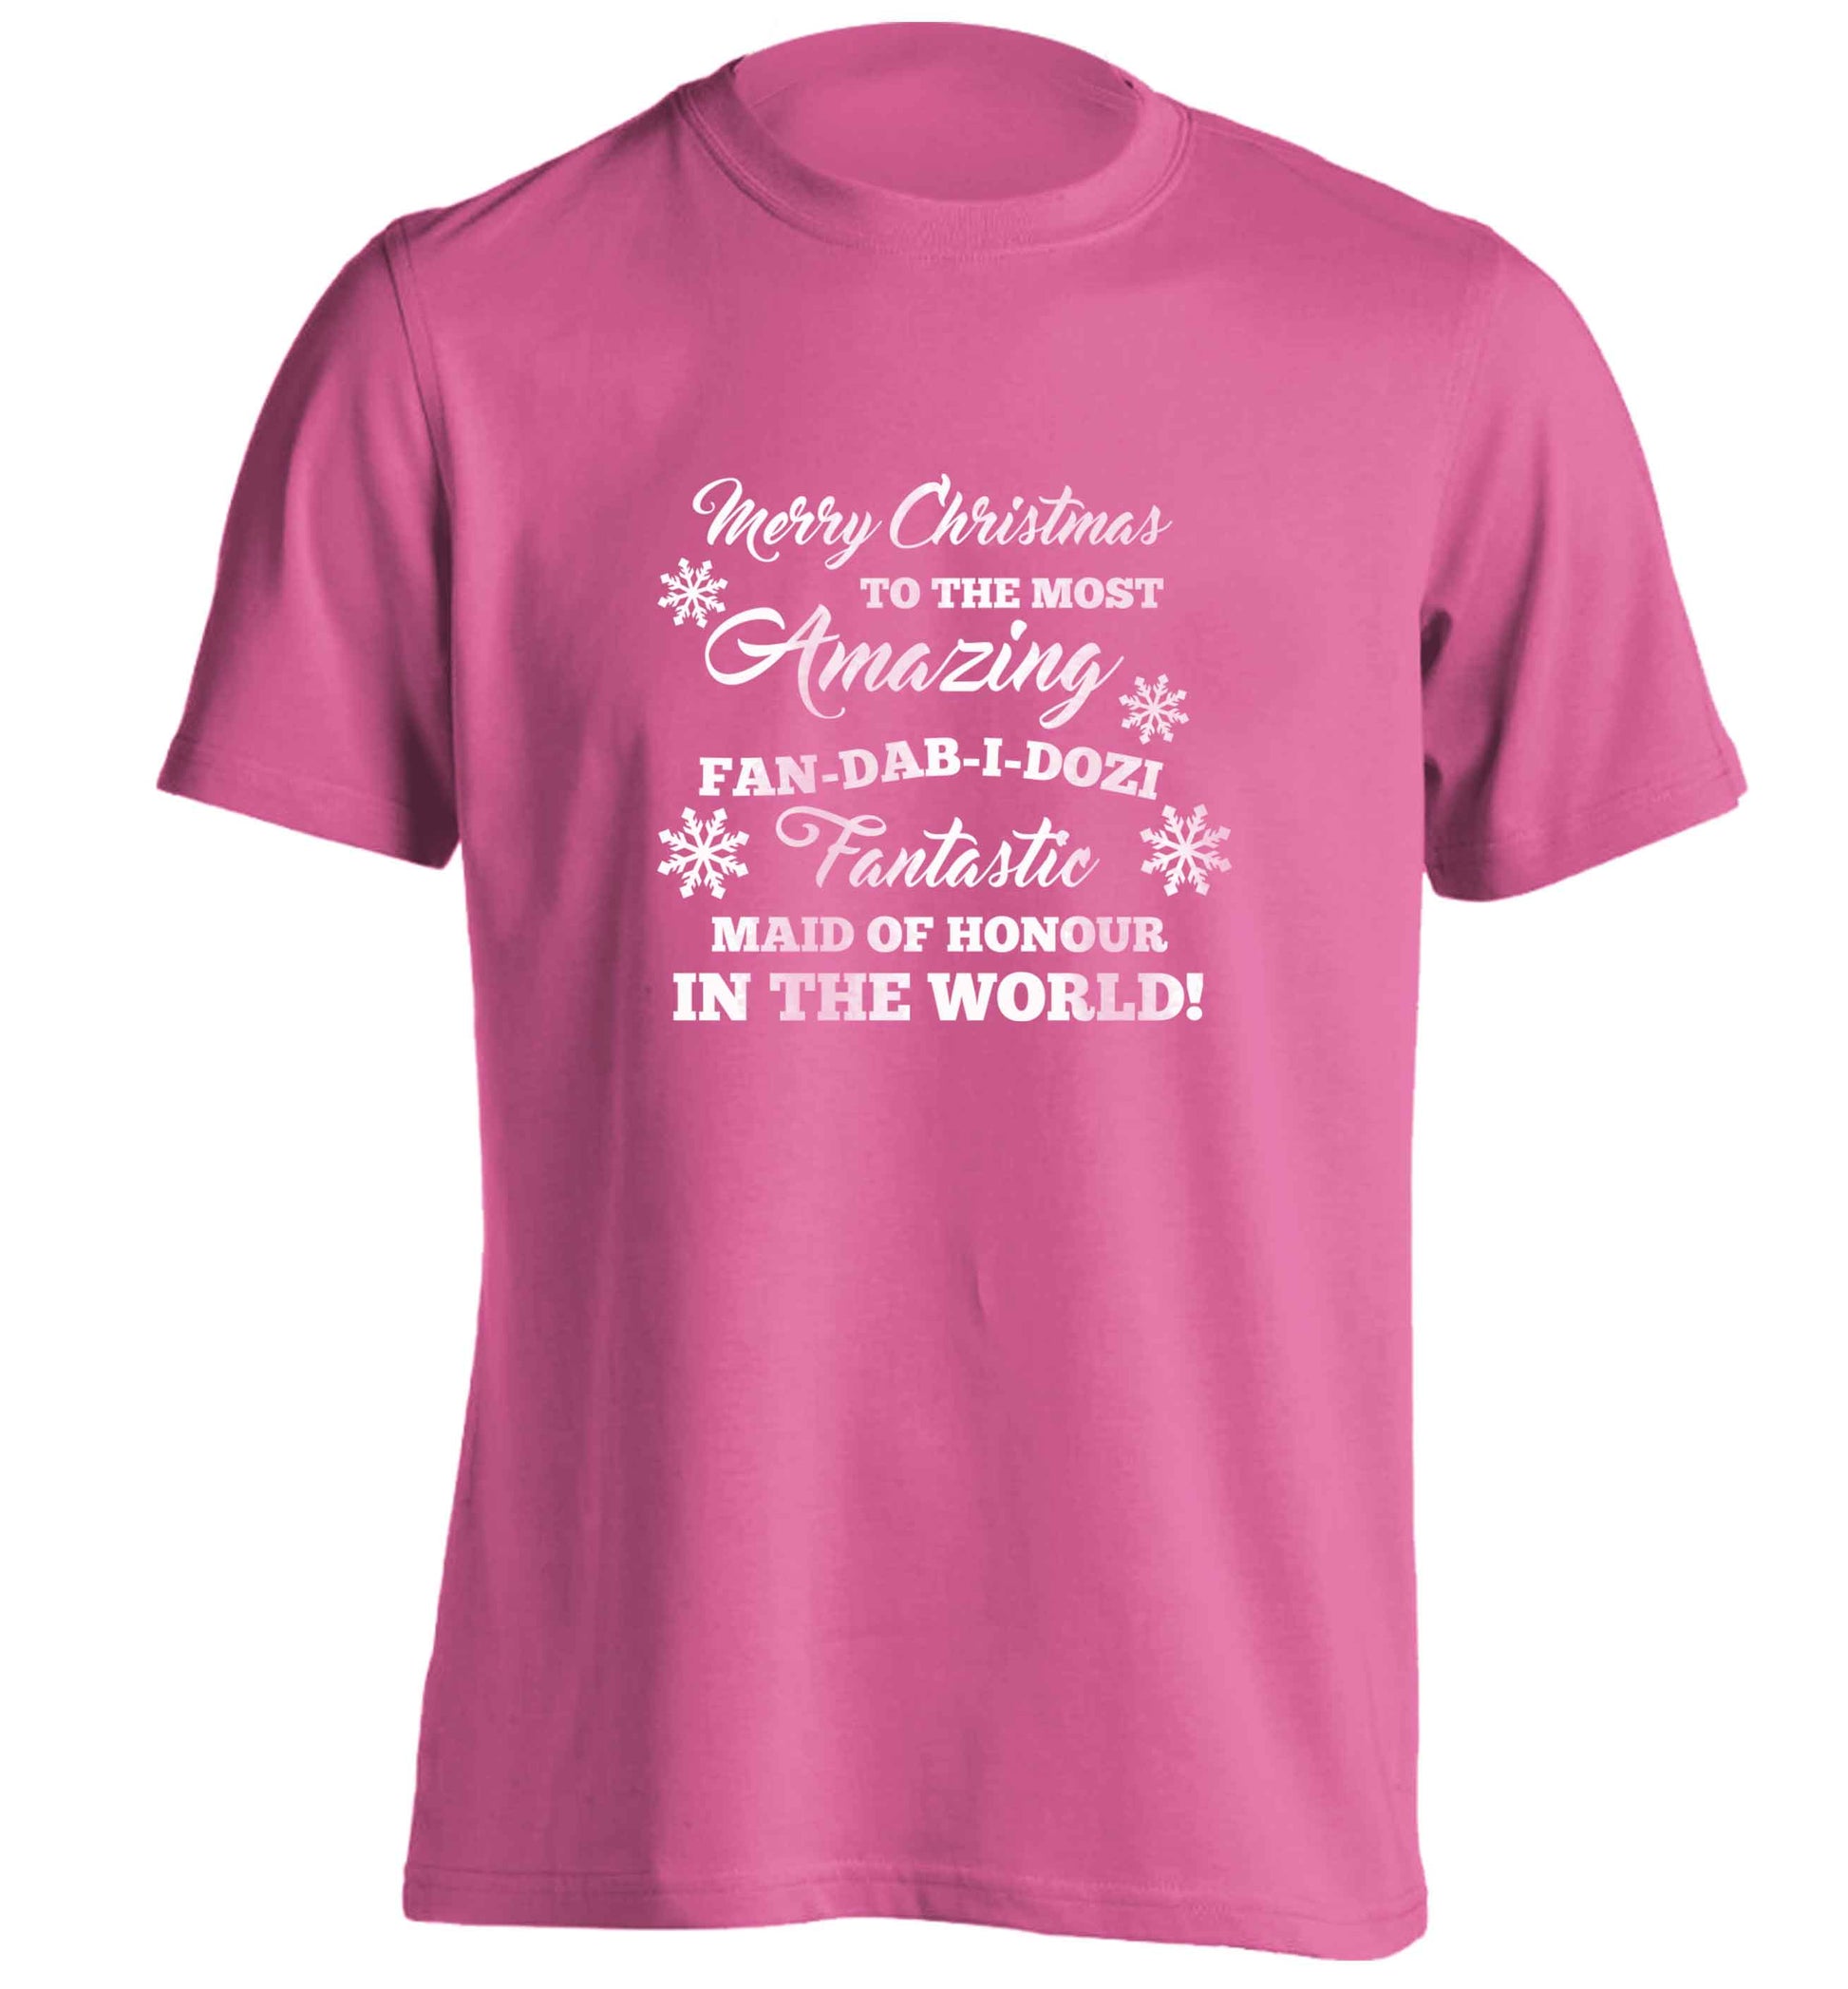 Merry Christmas to the most amazing maid of honour in the world! adults unisex pink Tshirt 2XL